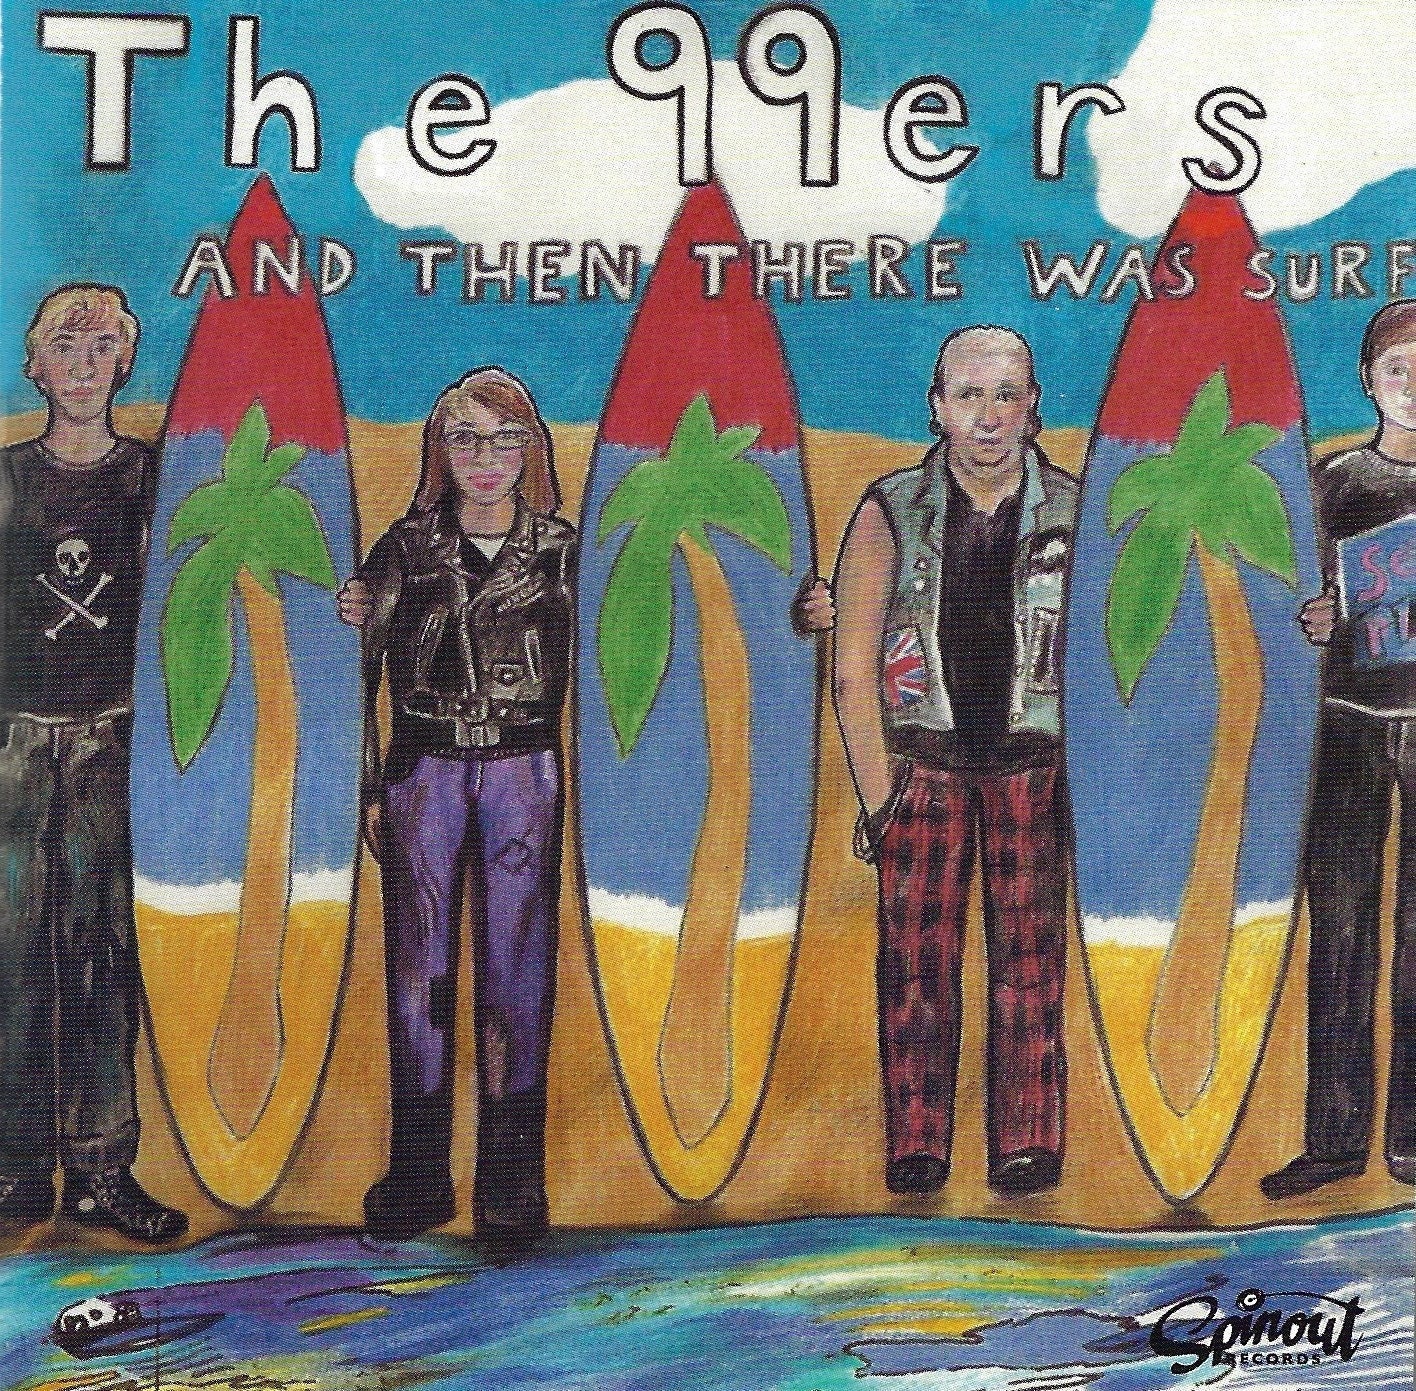 The 99ers "And Then There Was Surf" CD